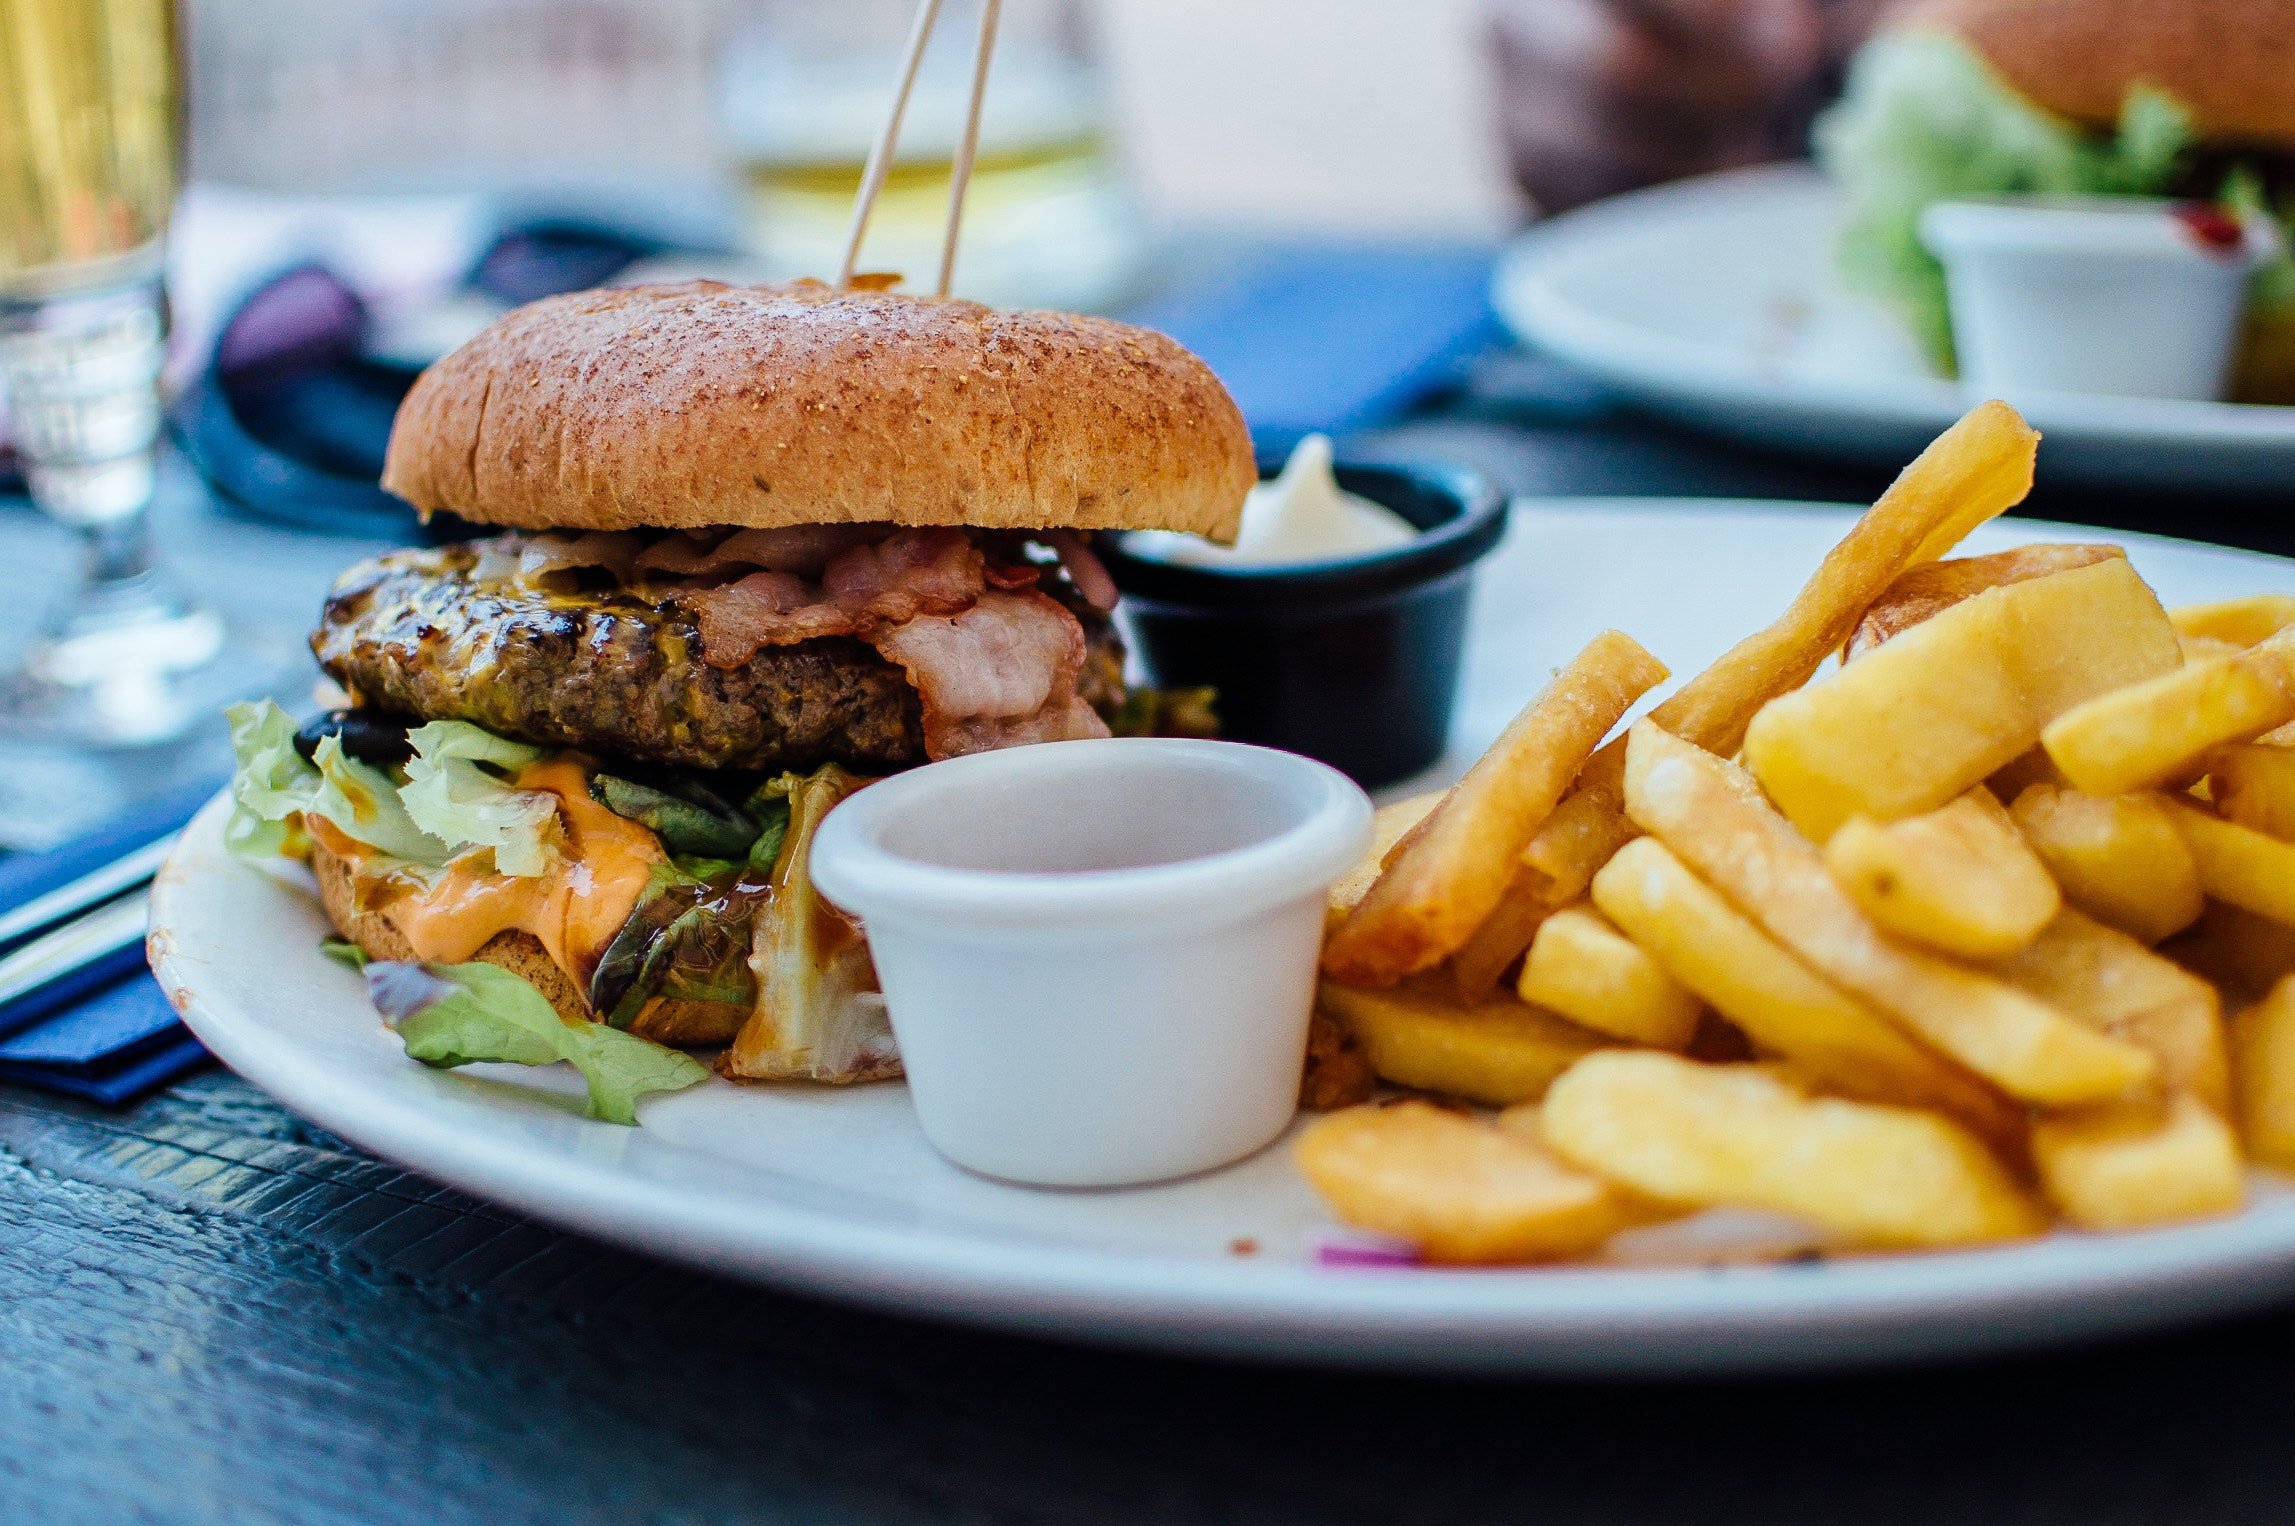 Sinan would treat Lucas to burgers and fries at the fast-food restaurant he worked at. | Photo: Pexels